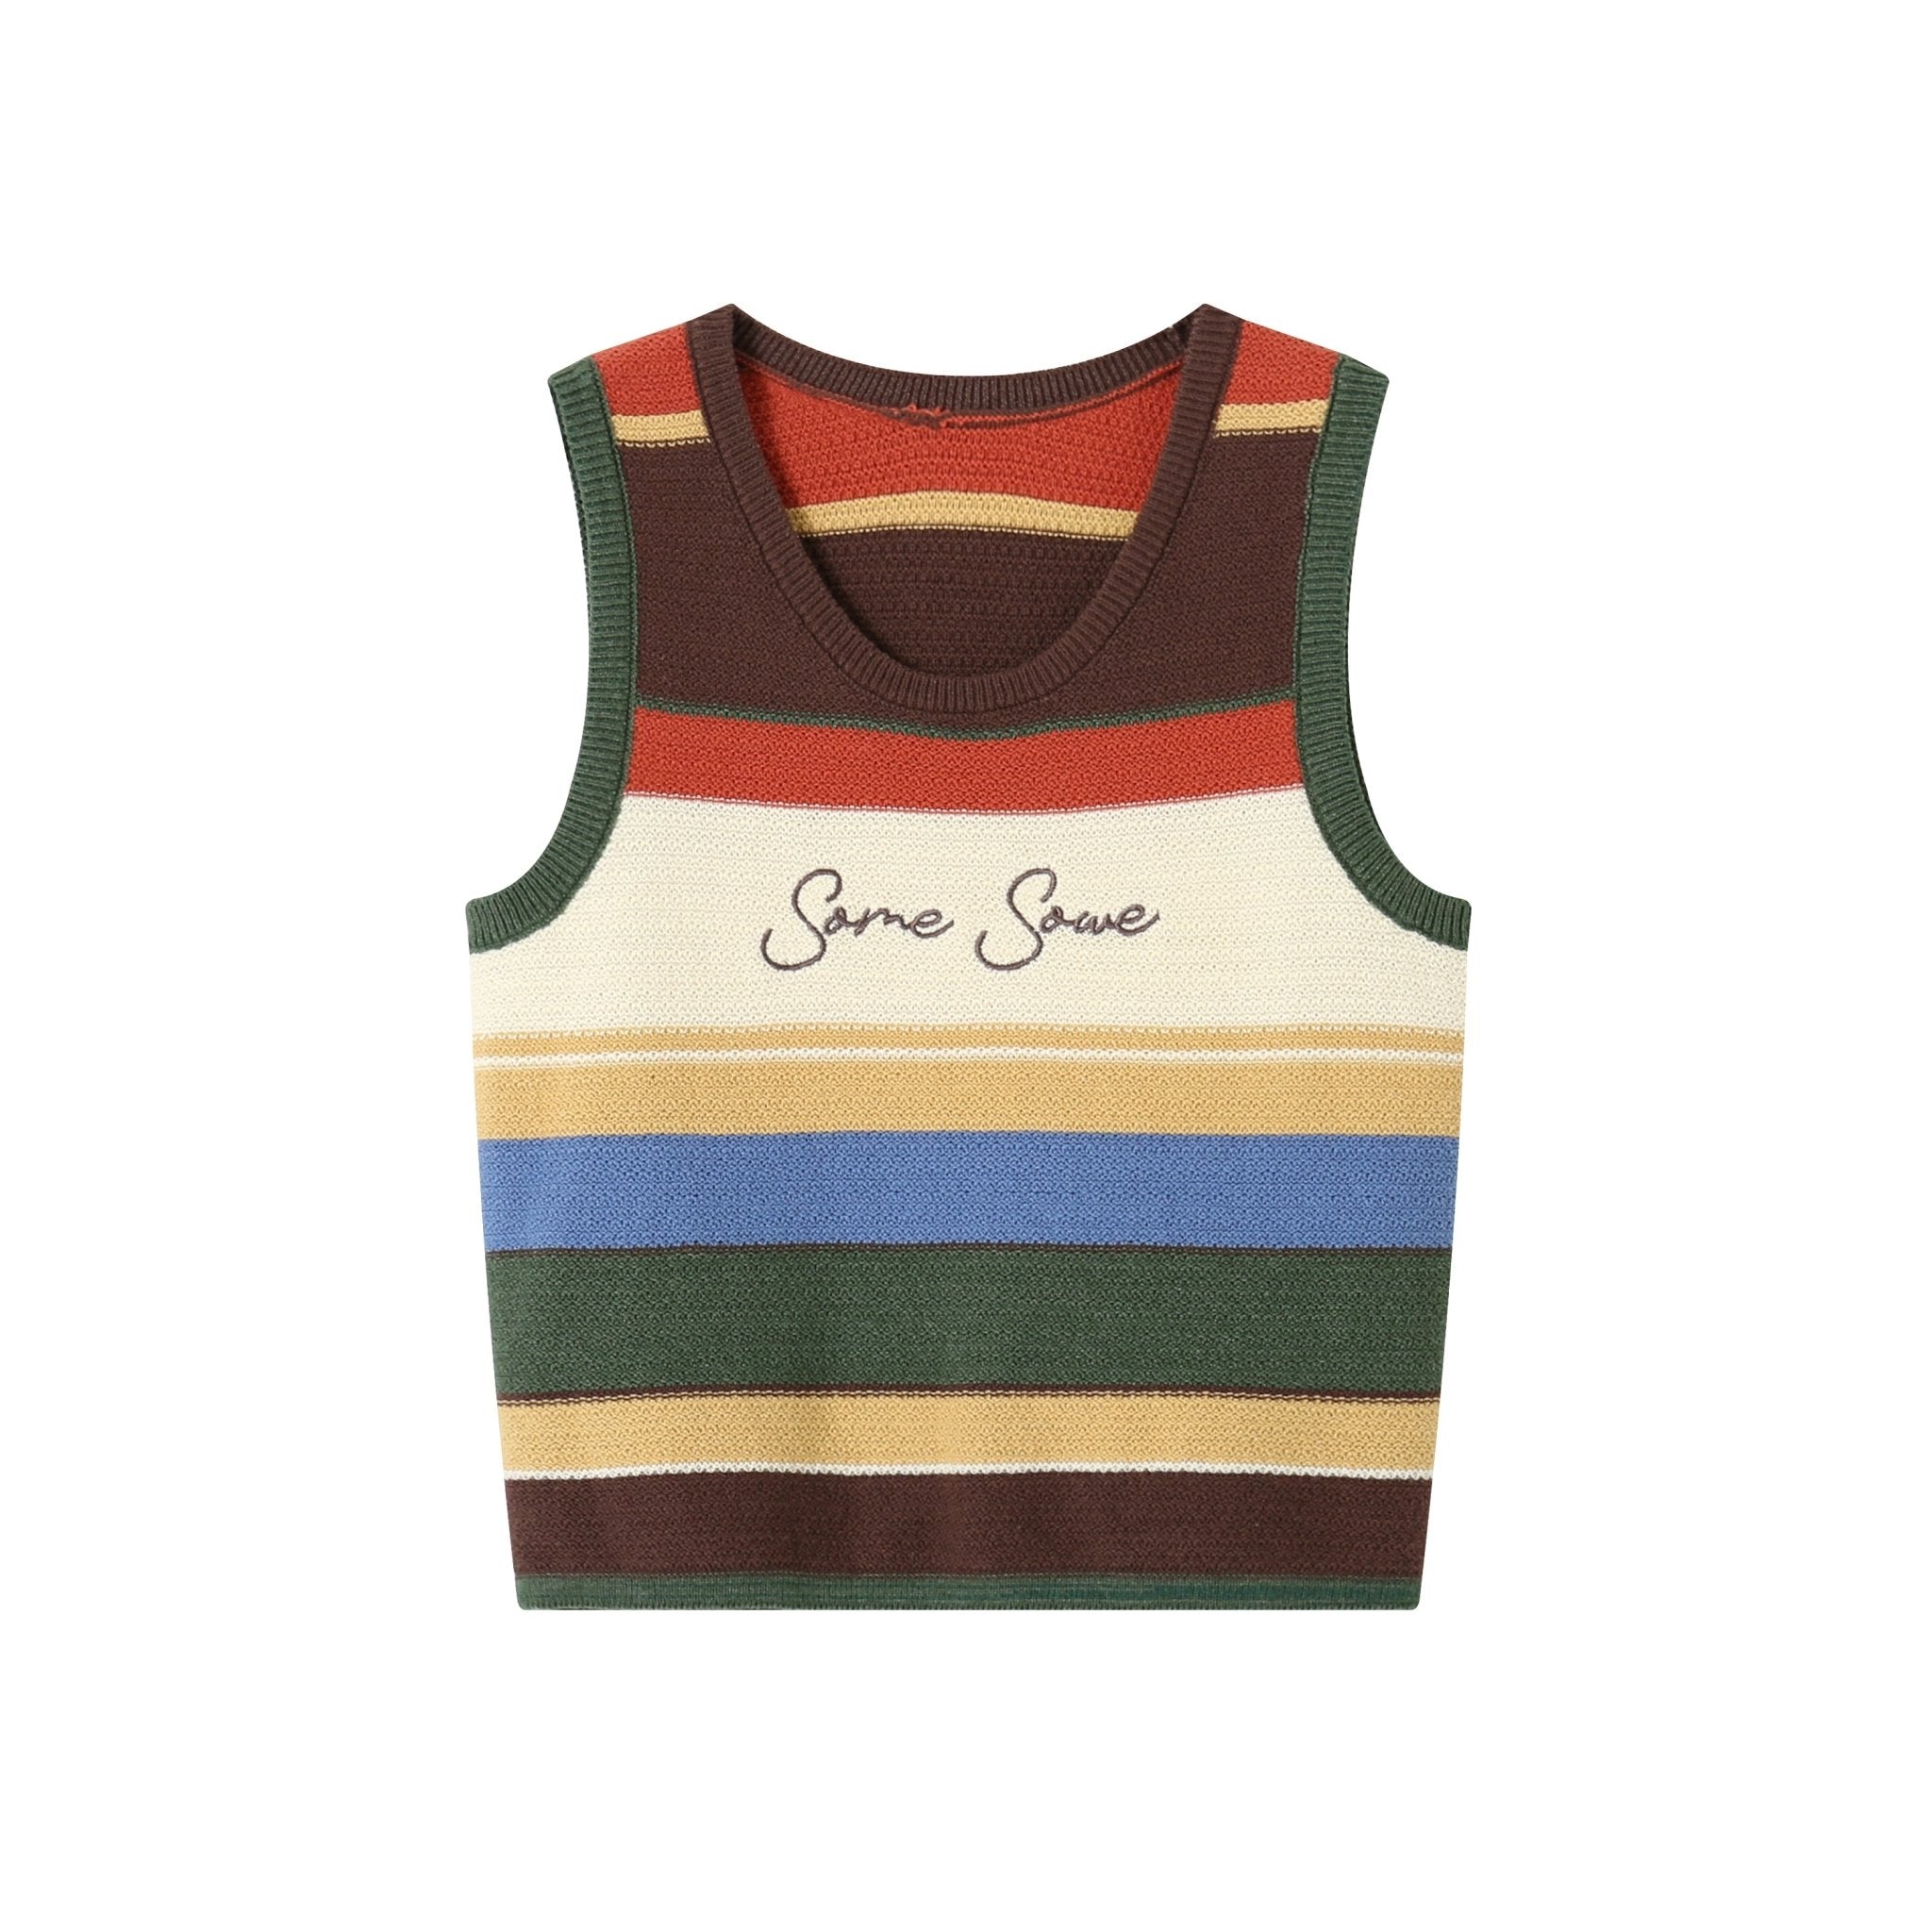 SOMESOWE Rainbow Embroidered Knitted Tank Top | MADA IN CHINA